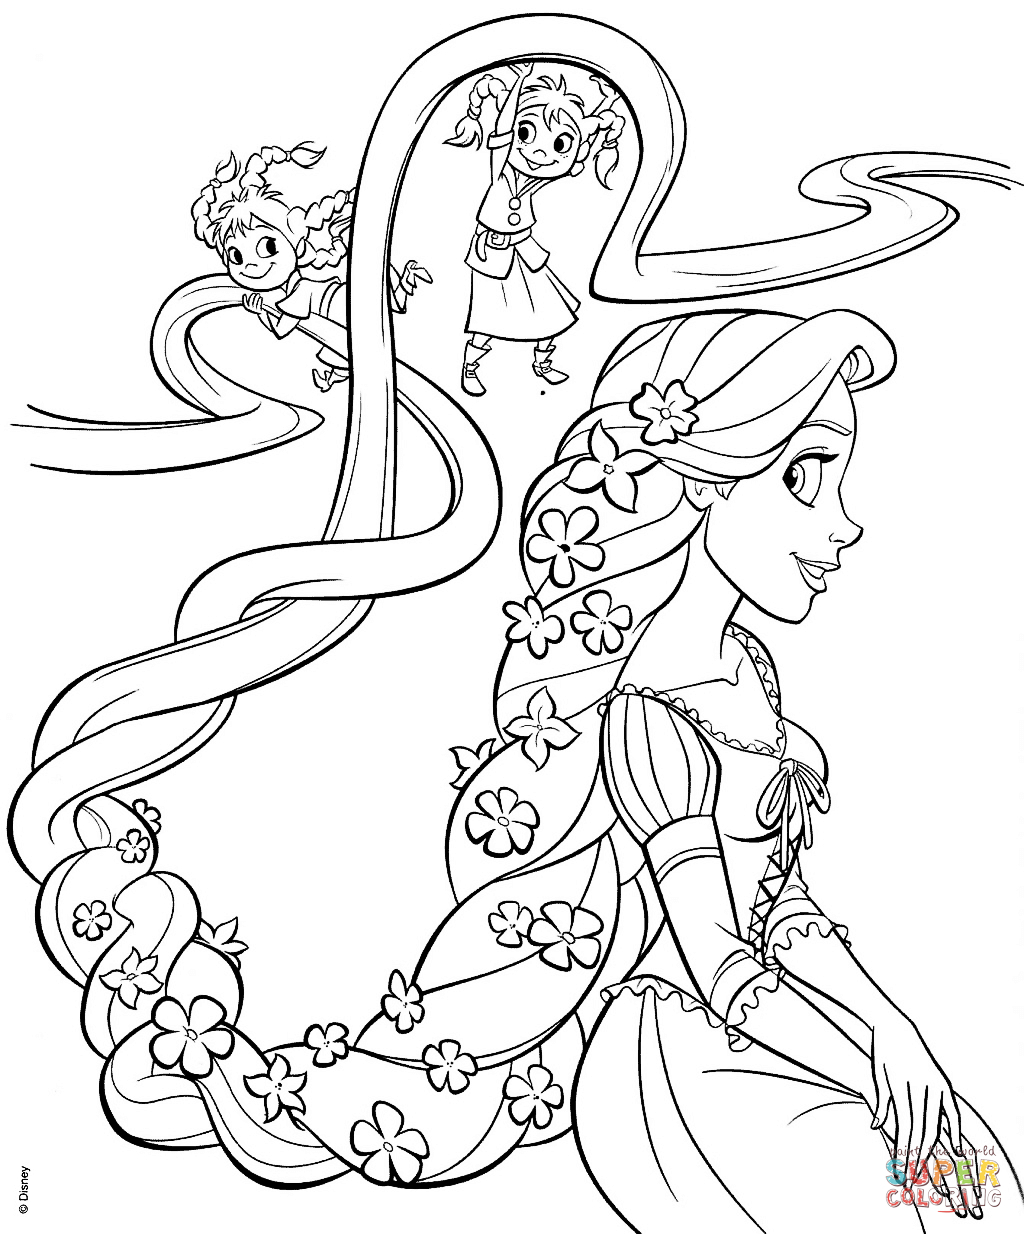 Rapunzel And Four Sisters Coloring Page | Free Printable Coloring Pages - Free Printable Tangled